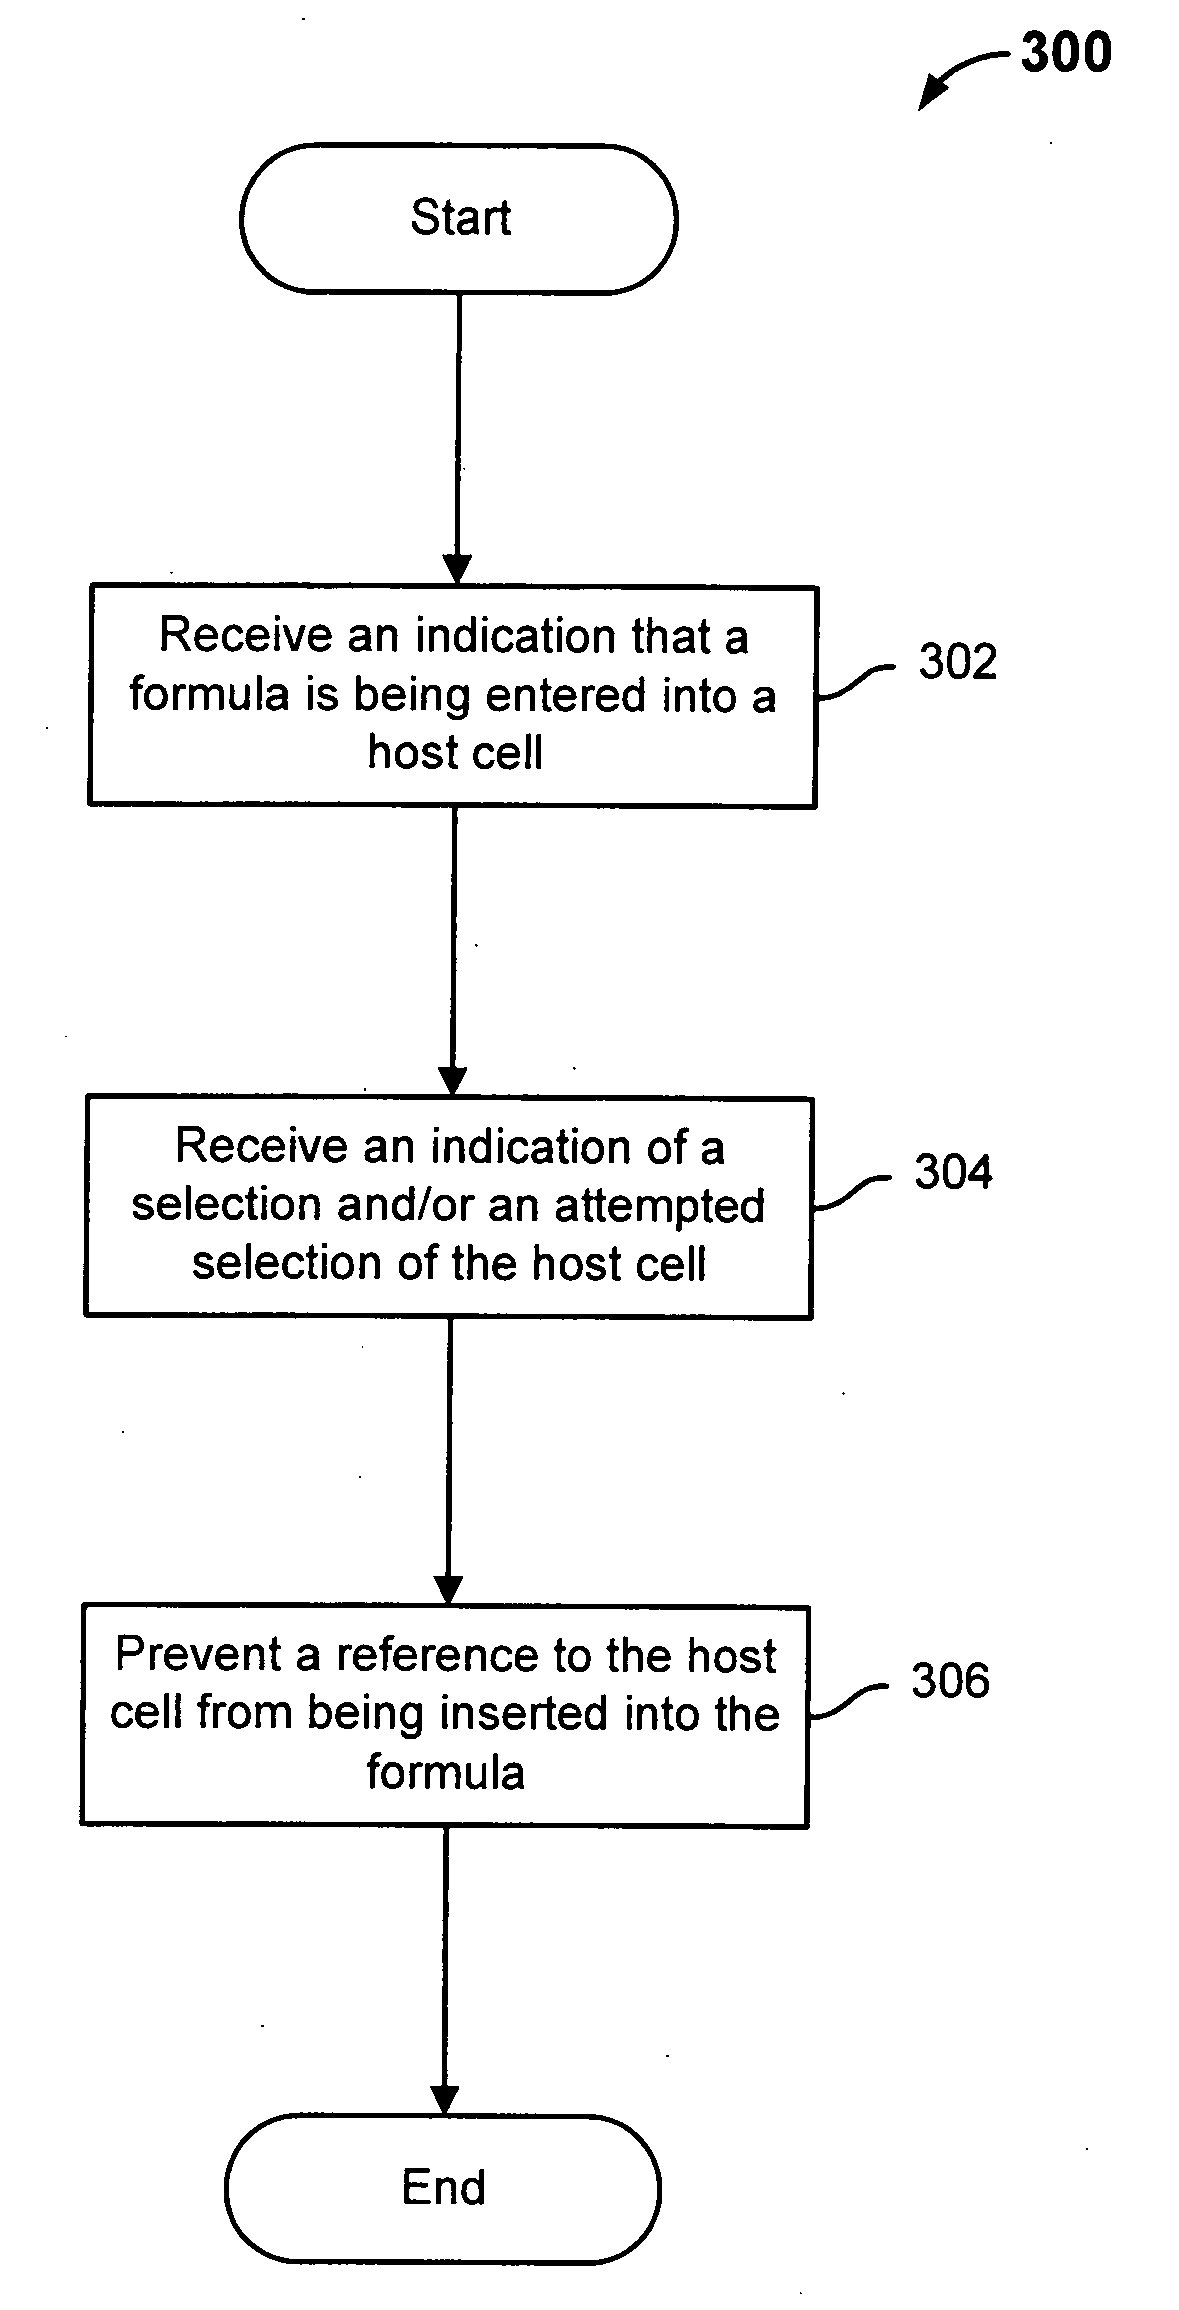 Preventing the inclusion of a reference to a host cell in a formula